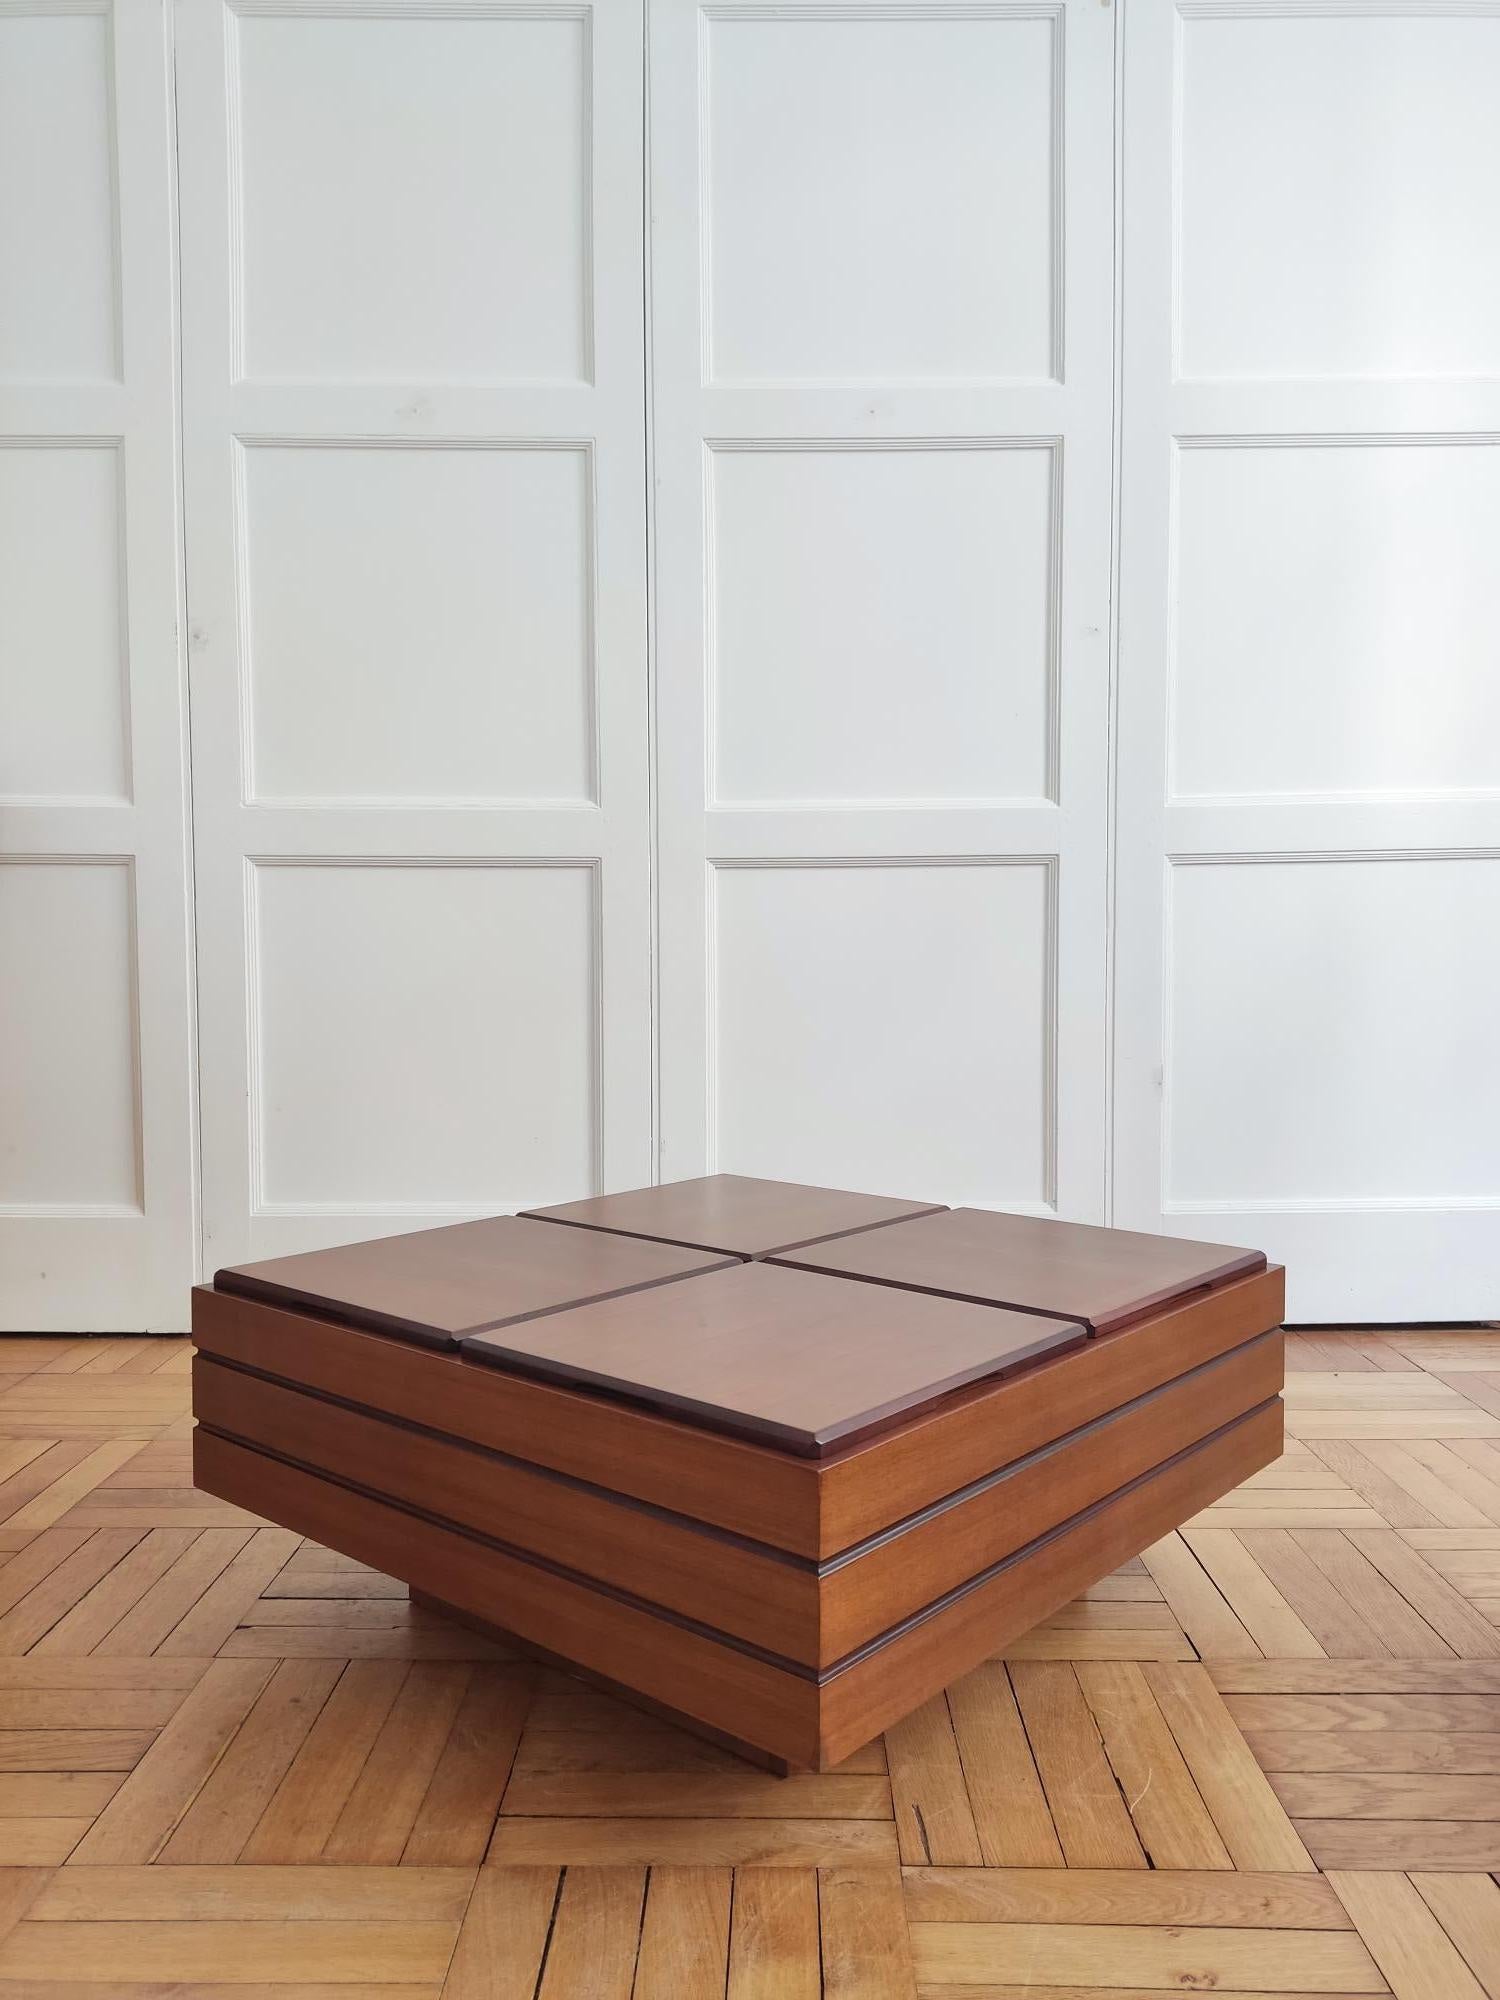 Iconic teak wood coffee table attributed to Carlo Hauner and manufactured by Format Italy 60s.
The table is divided into 4 cubes, each of which has a lid, making it very practical to use.

Carlo Hauner (Brescia 1927-1997) is known for his designs